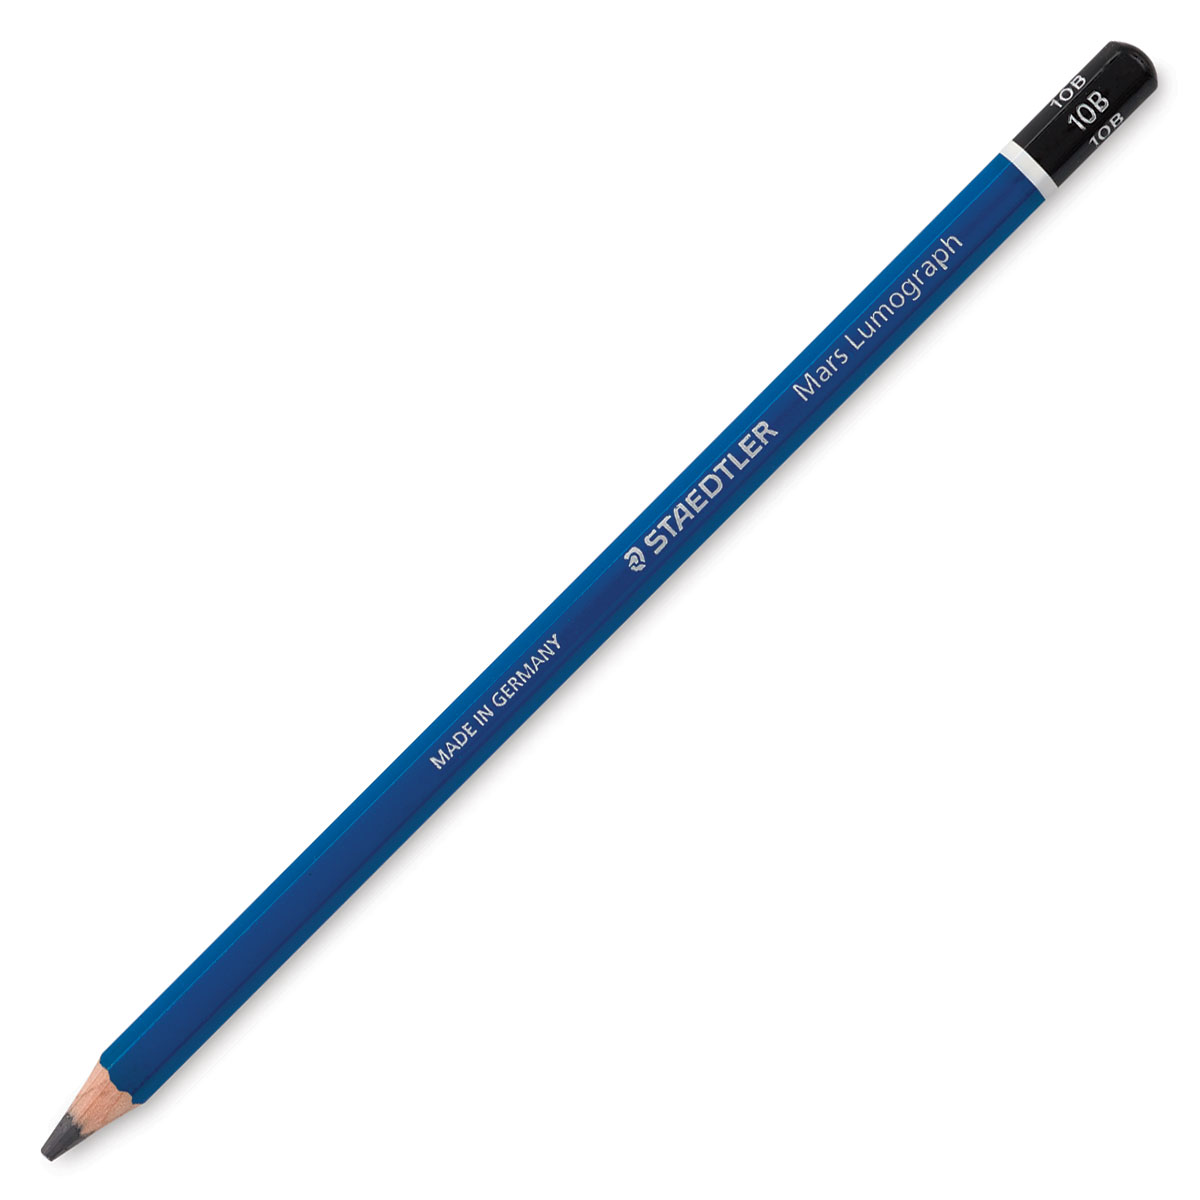 Staedtler Lumograph Drawing and Sketching Pencils and Sets  BLICK Art  Materials